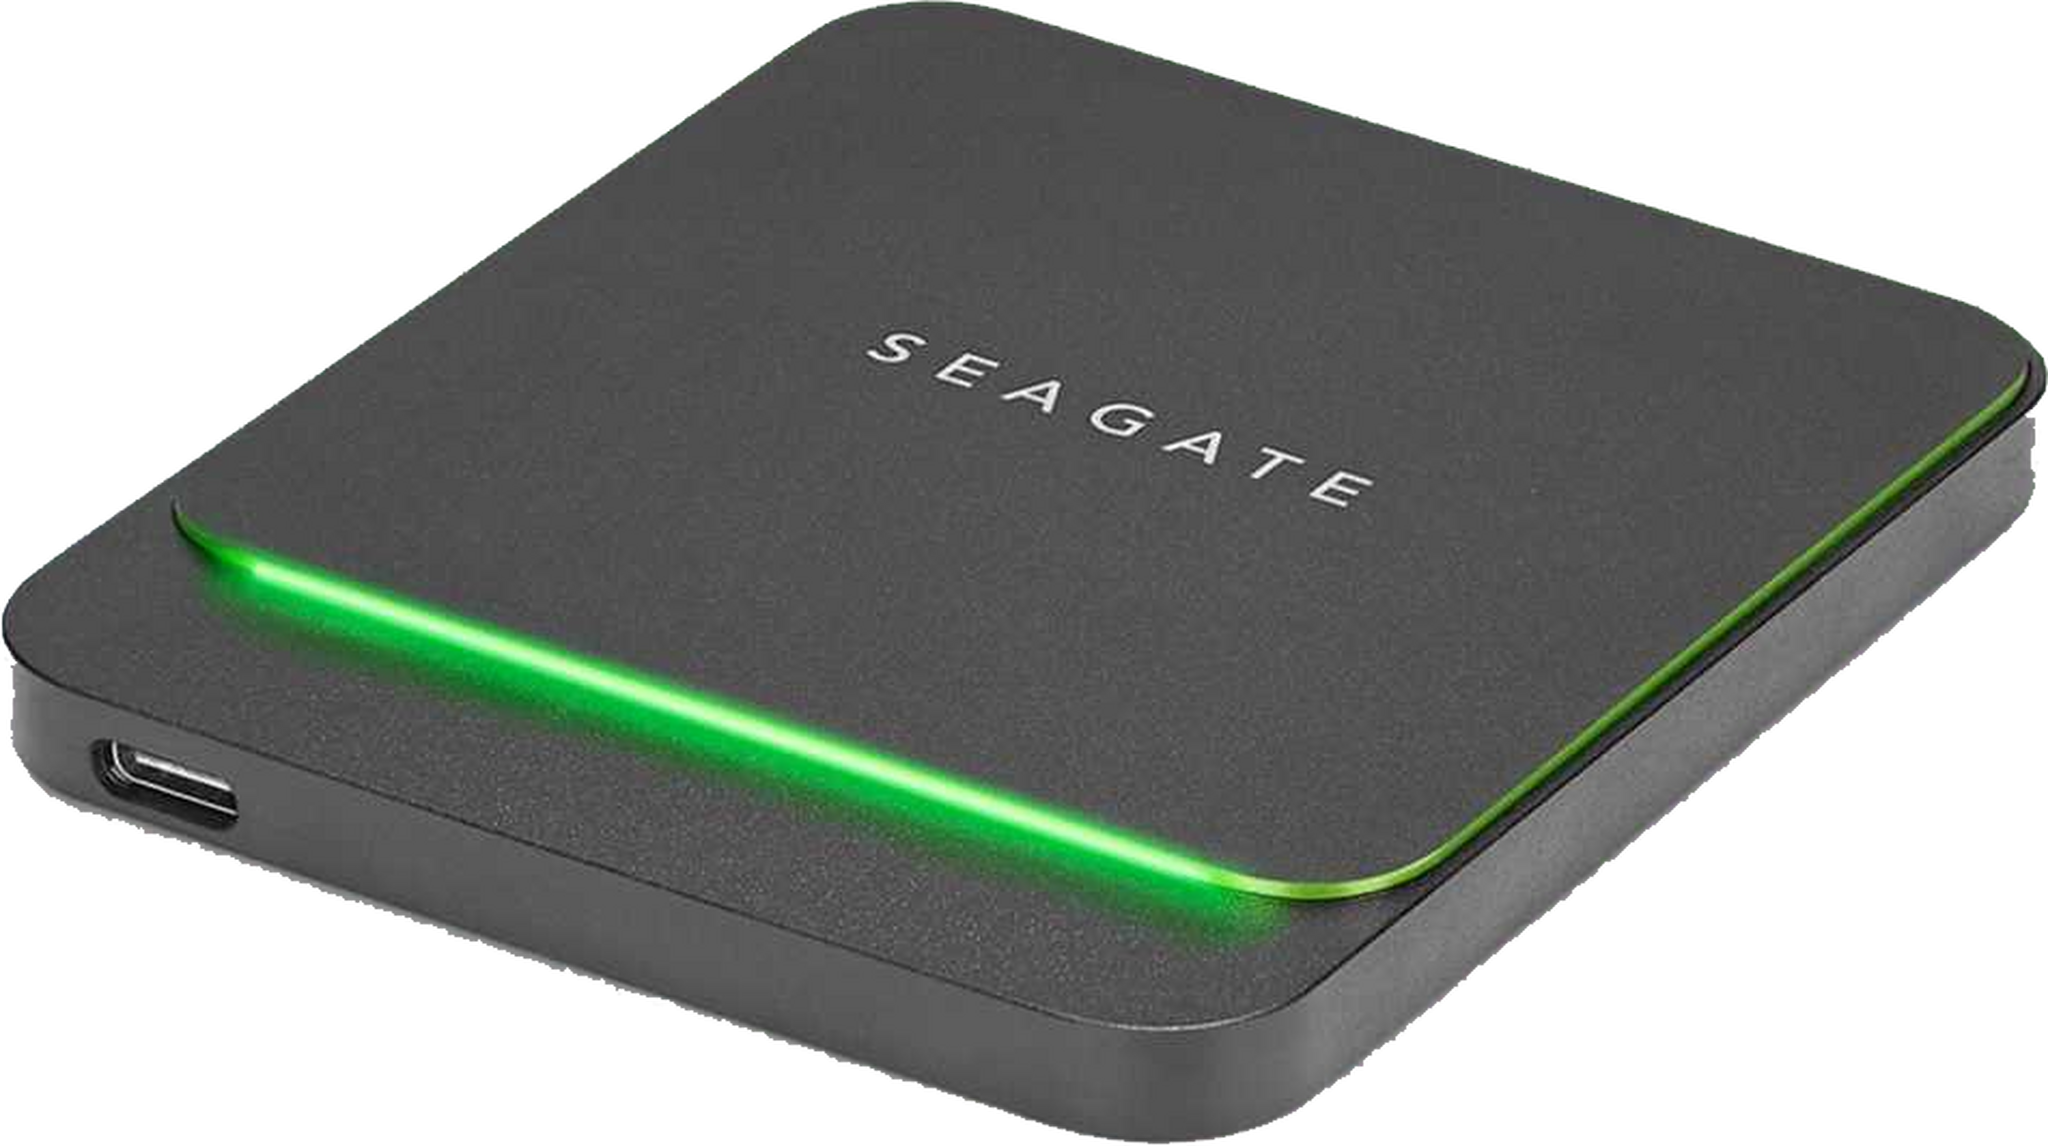 Seagate Barracuda 2TB External Solid State Drive